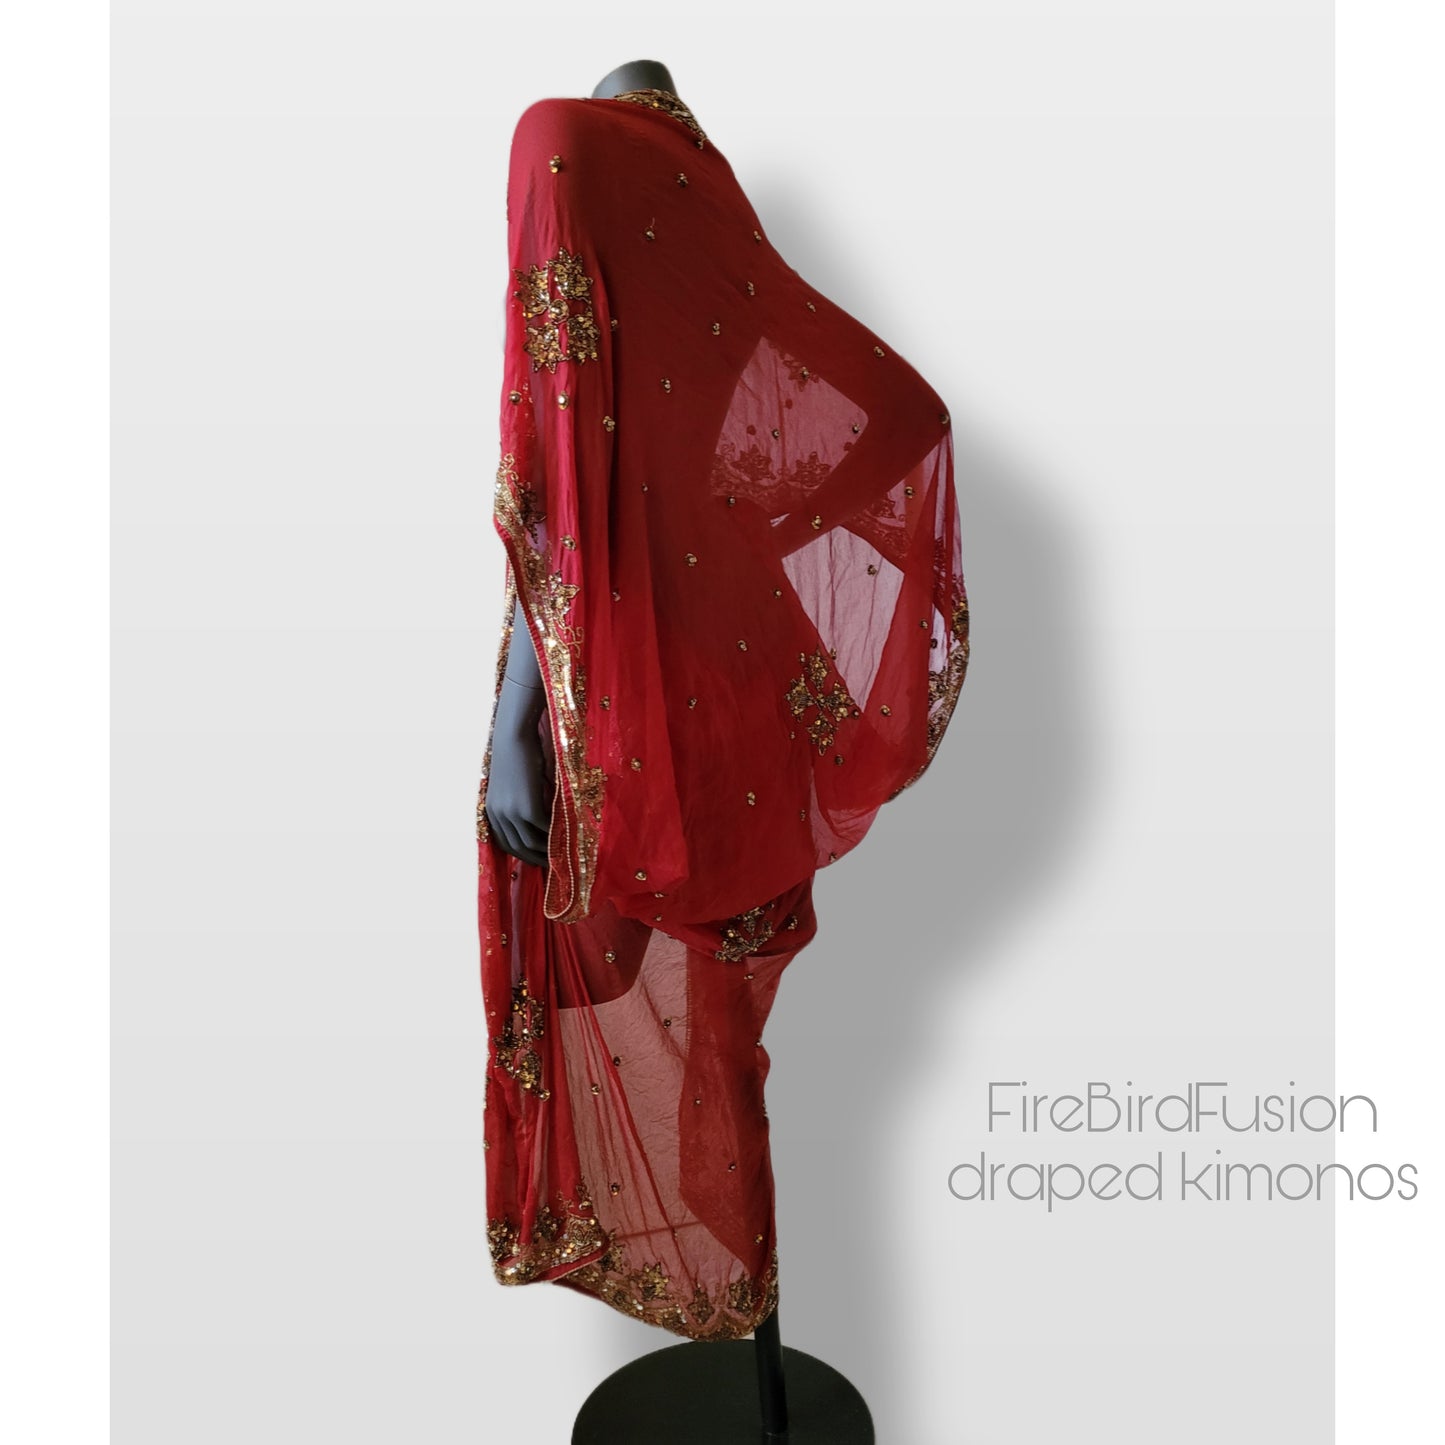 Draped kimono in red with elaborated hand embrodery in gold (M-L)